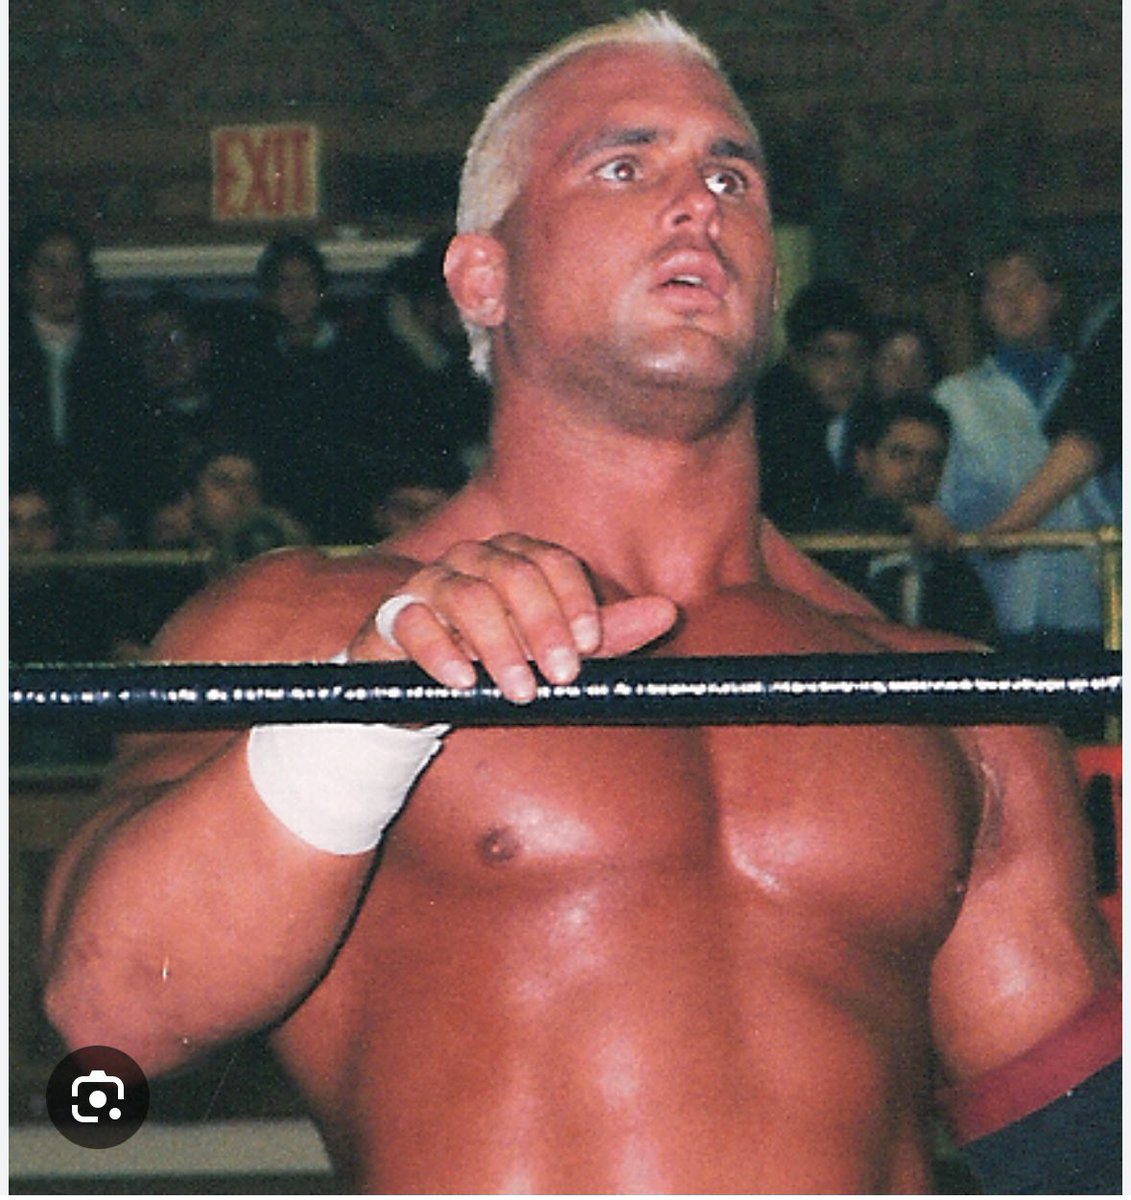 On this date in 2005, the world lost an incredible wrestler and a genuinely awesome person. Chris Candido, your memory stays alive